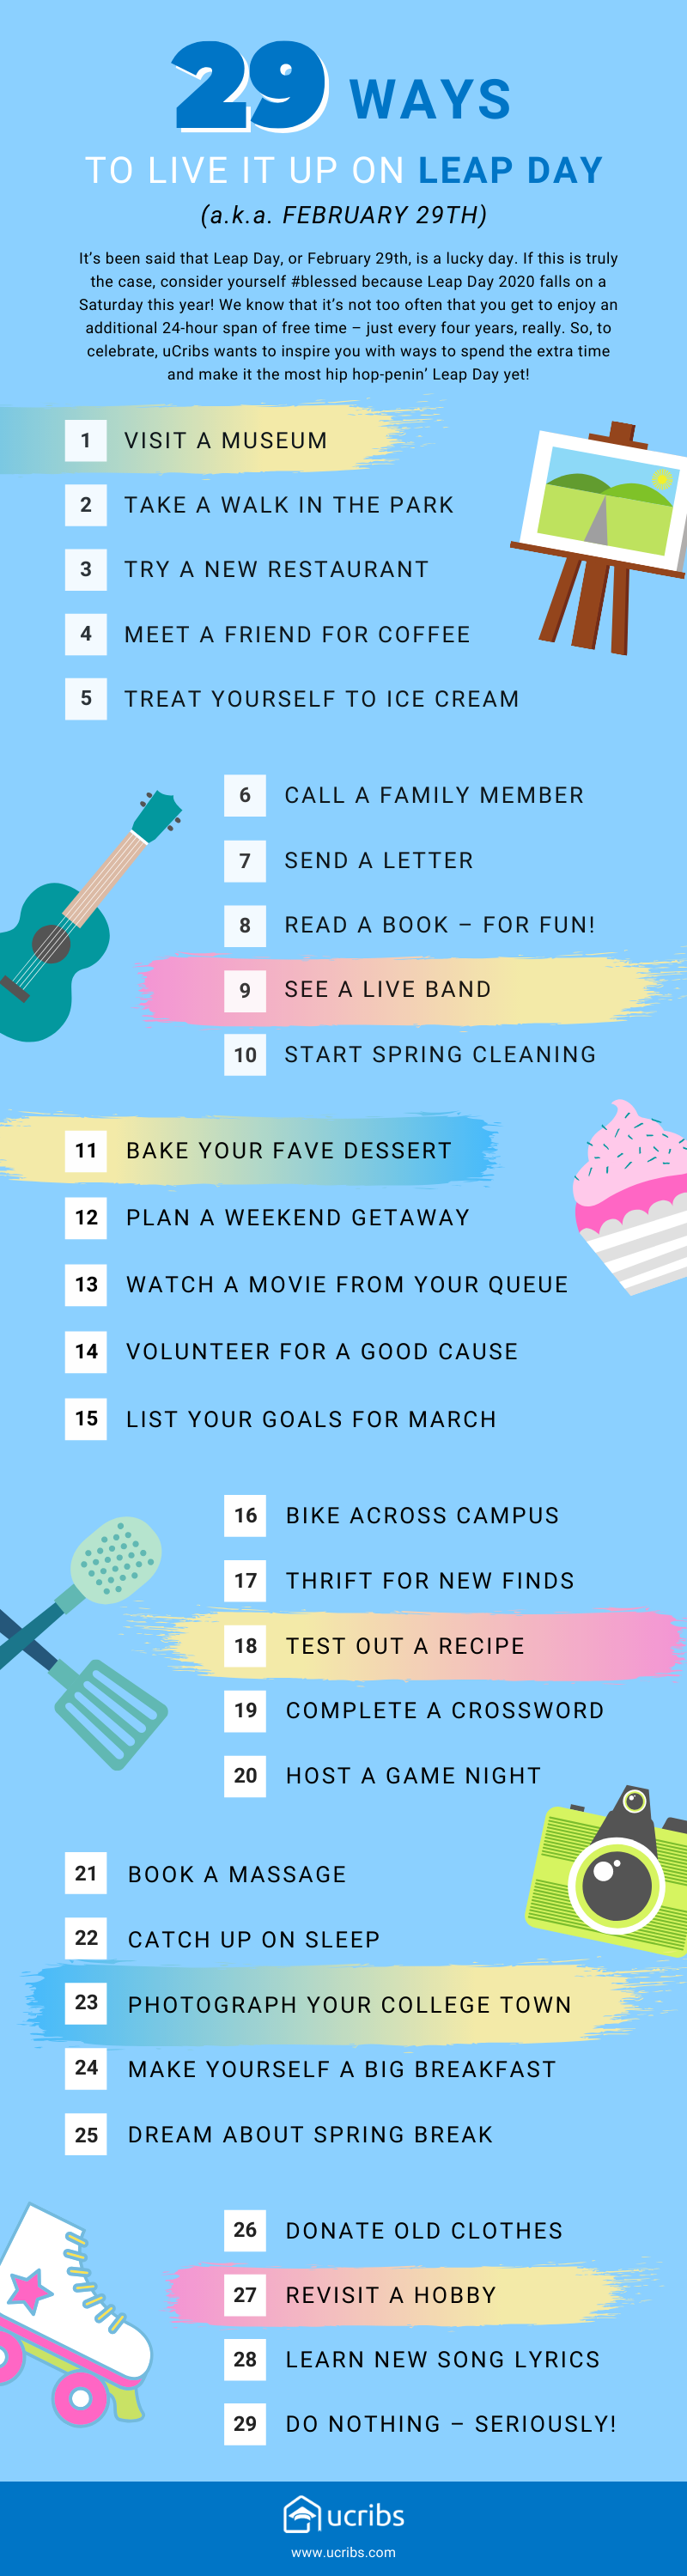 leap day, leap day activities, fun things to do, college life, how to spend leap day,